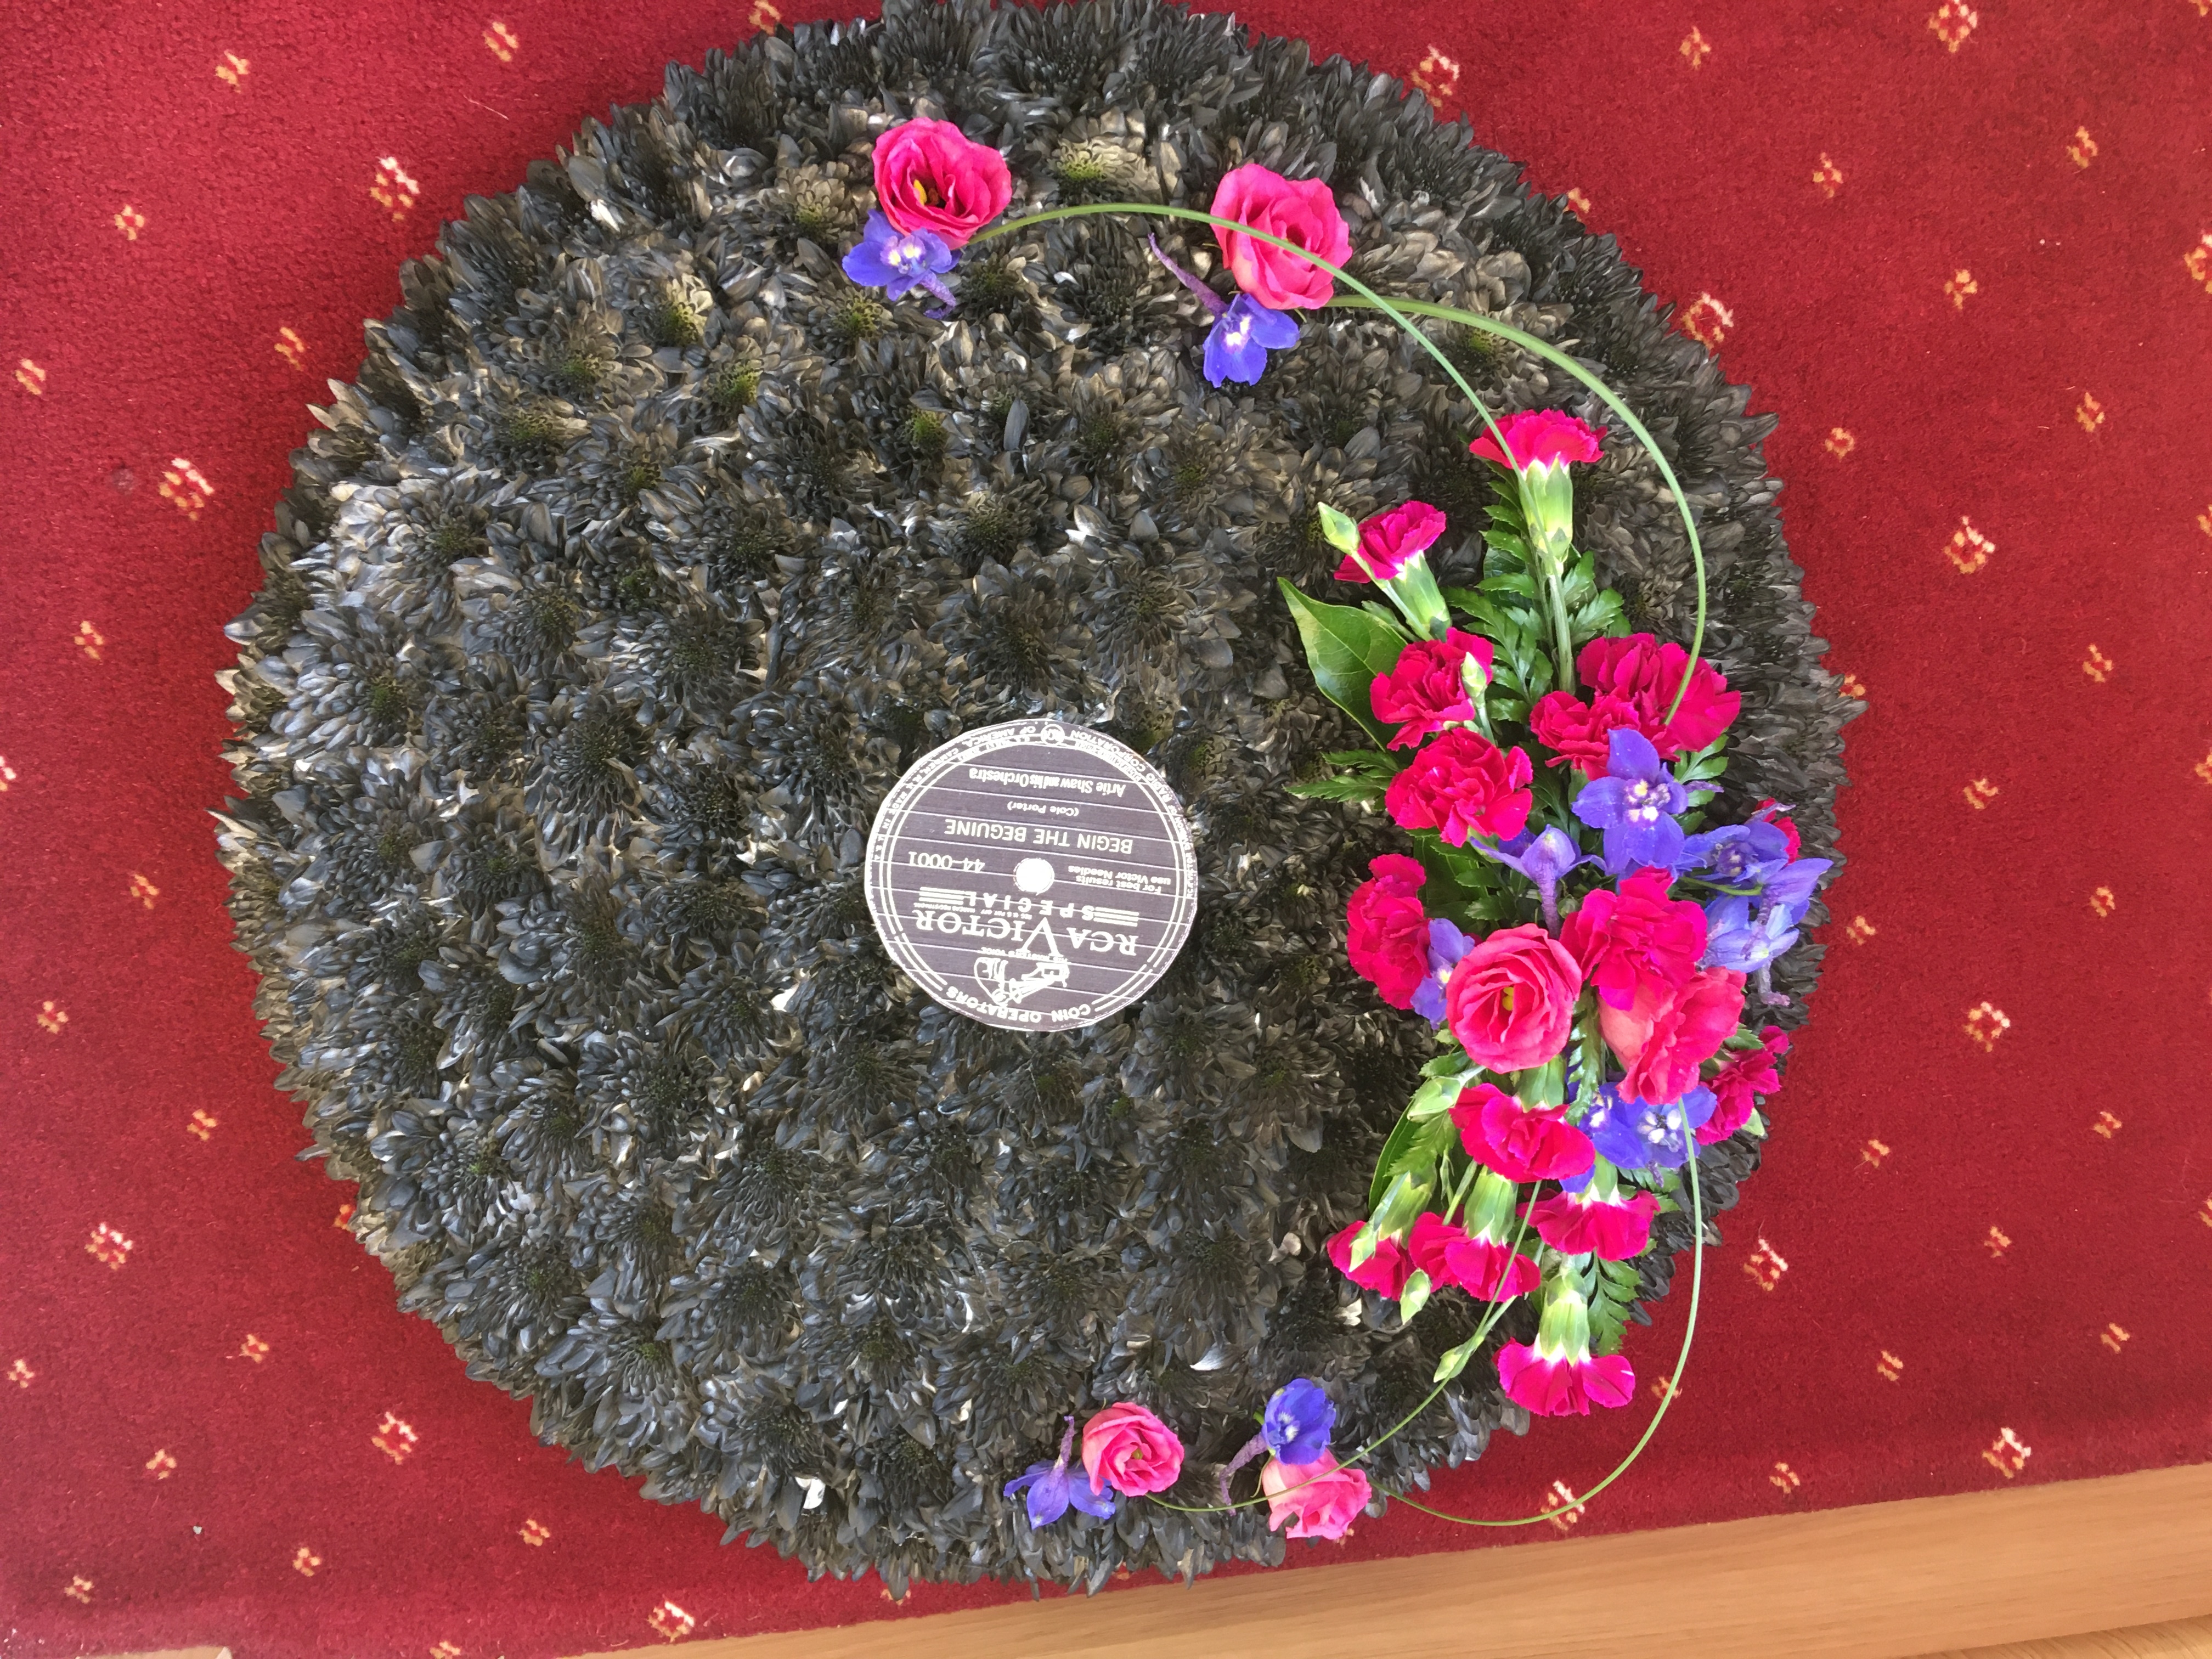 Record made from flowers